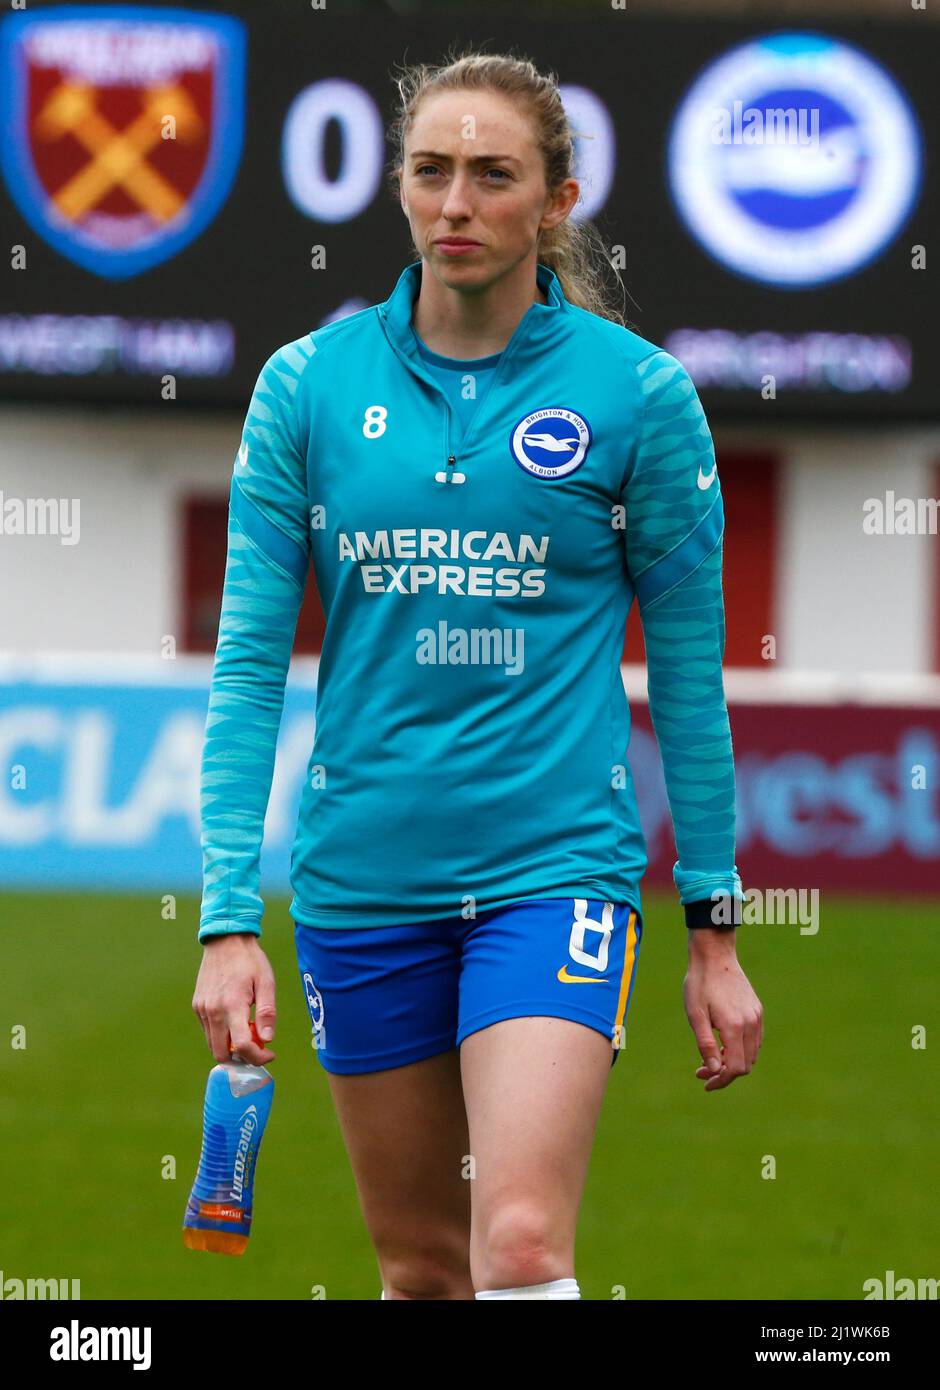 DAGENHAM, ENGLAND - MARCH 27: Megan Connolly of Brighton and Hove Albion WFC  during  Barclays FA Women's Super League  match between West Ham United Stock Photo